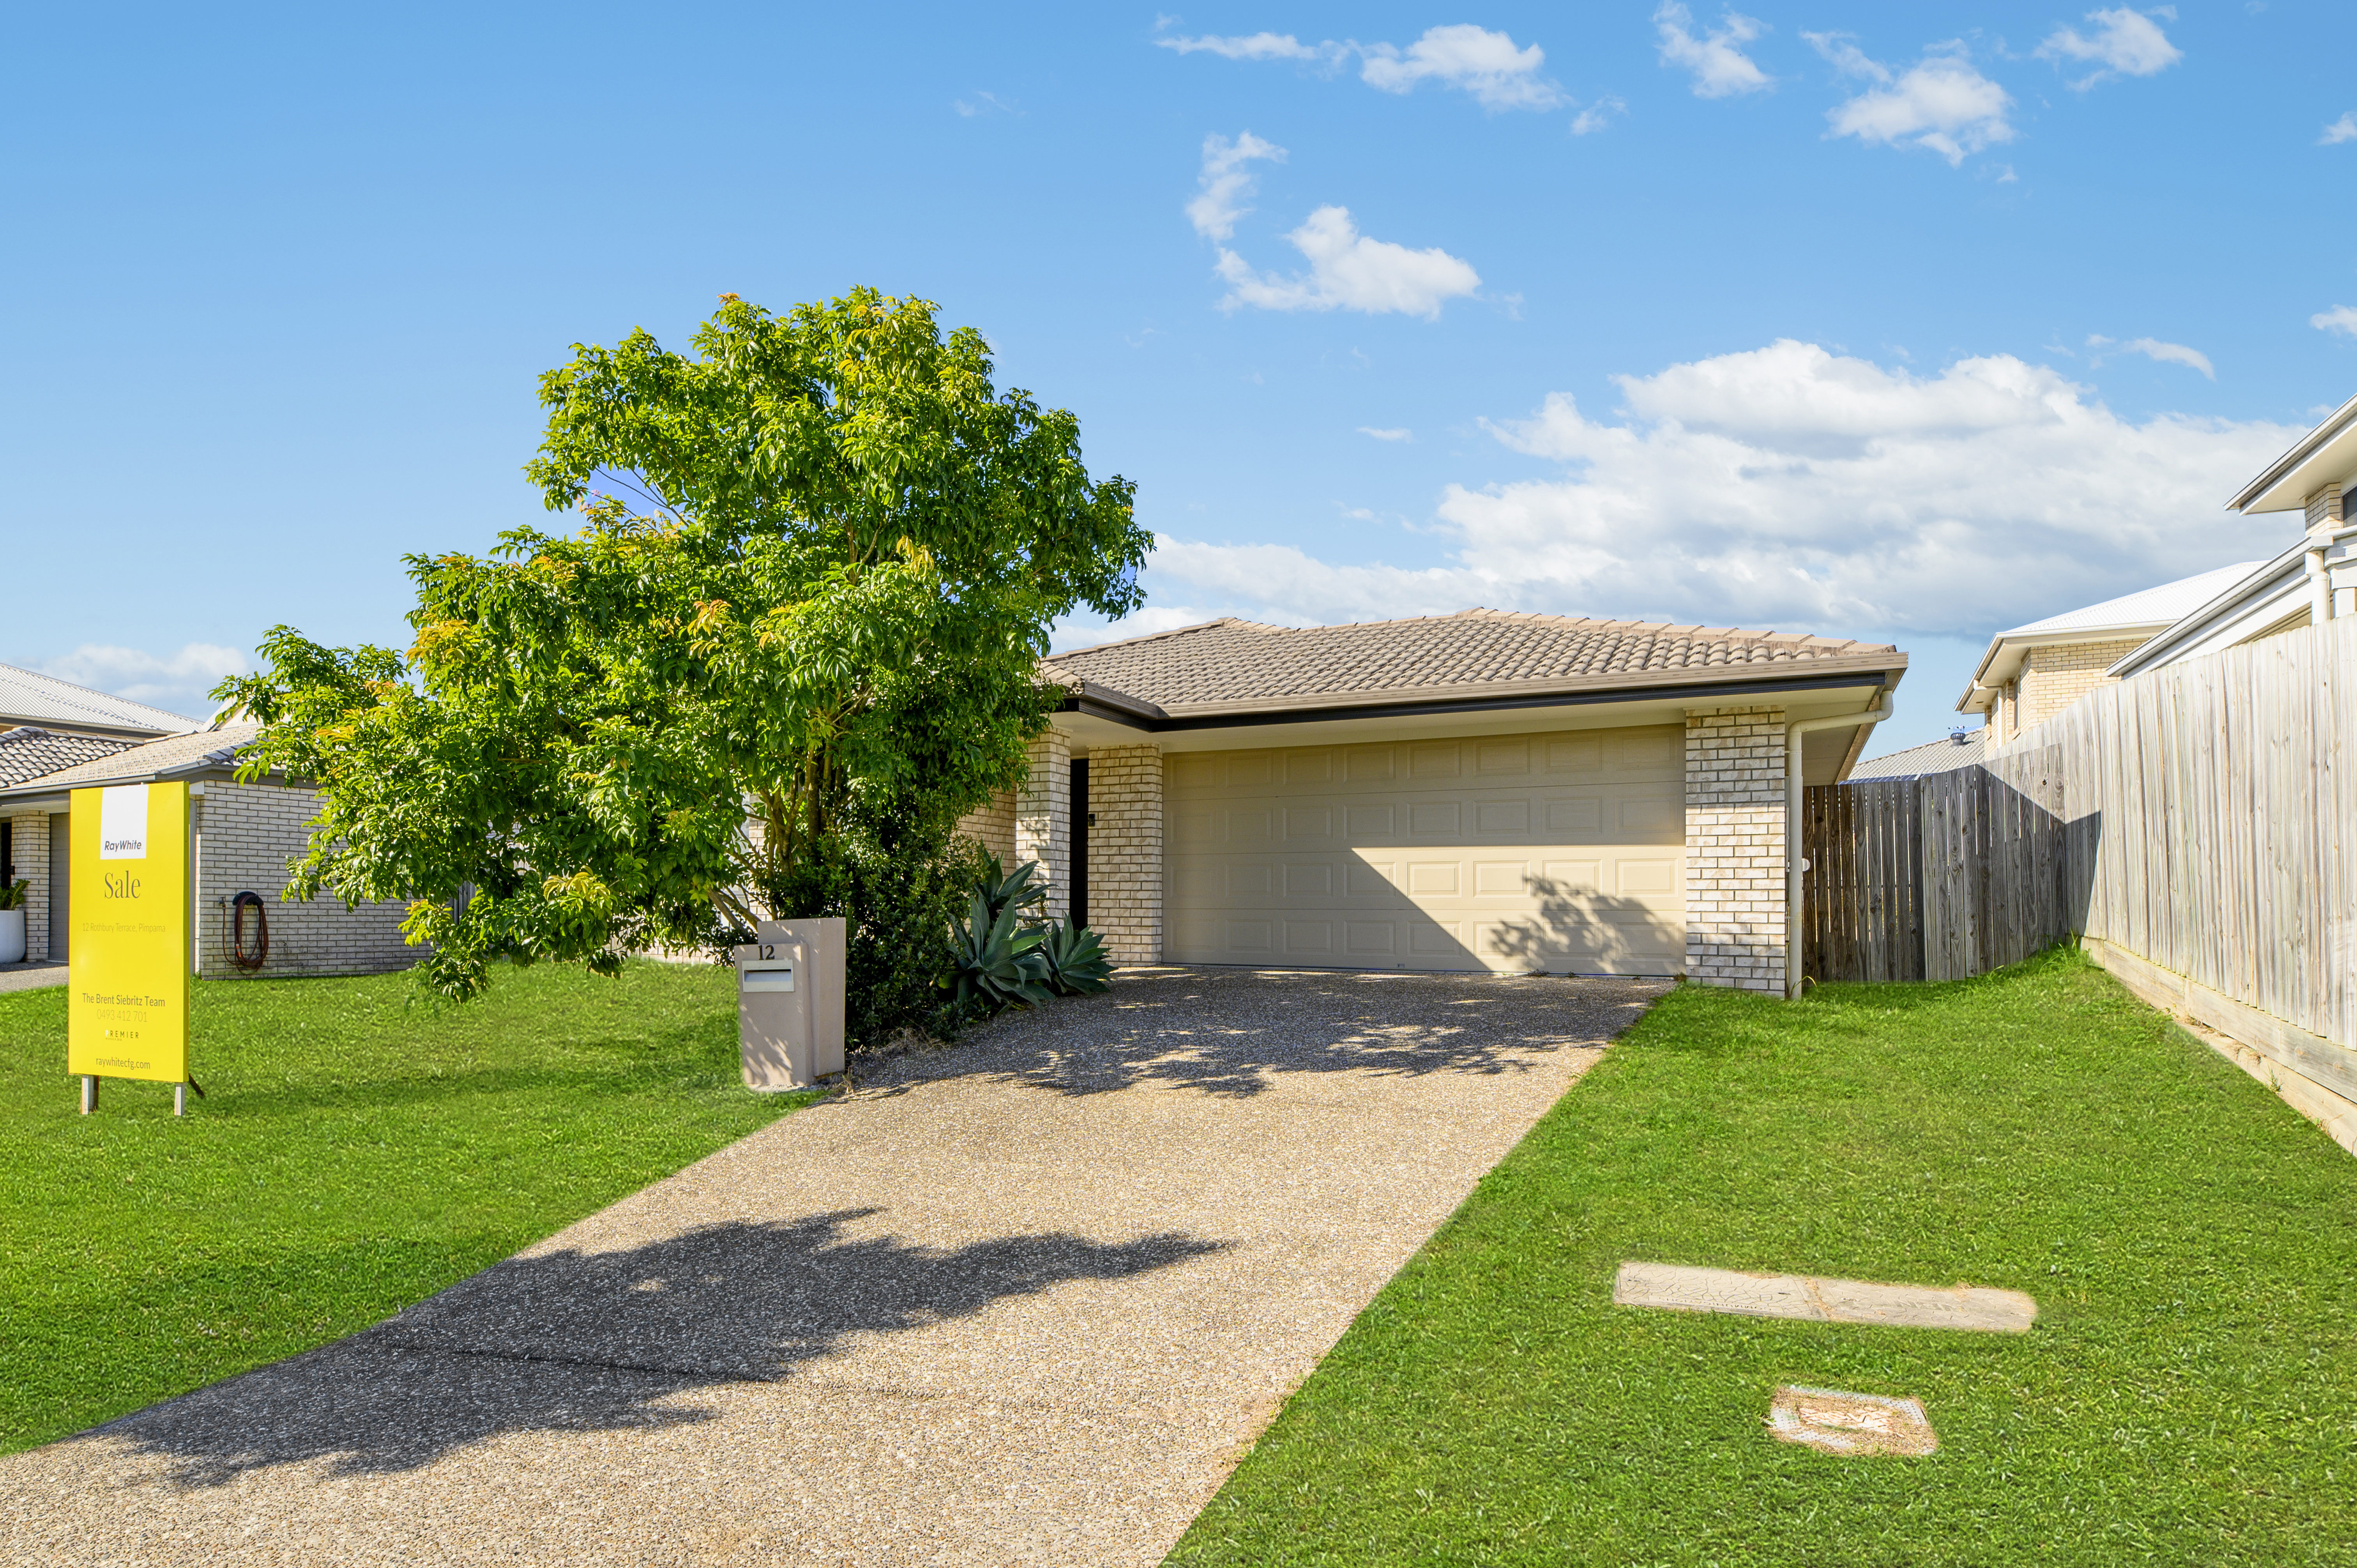 Pimpama 4chambre Don't Miss This Stunning Opportunity!